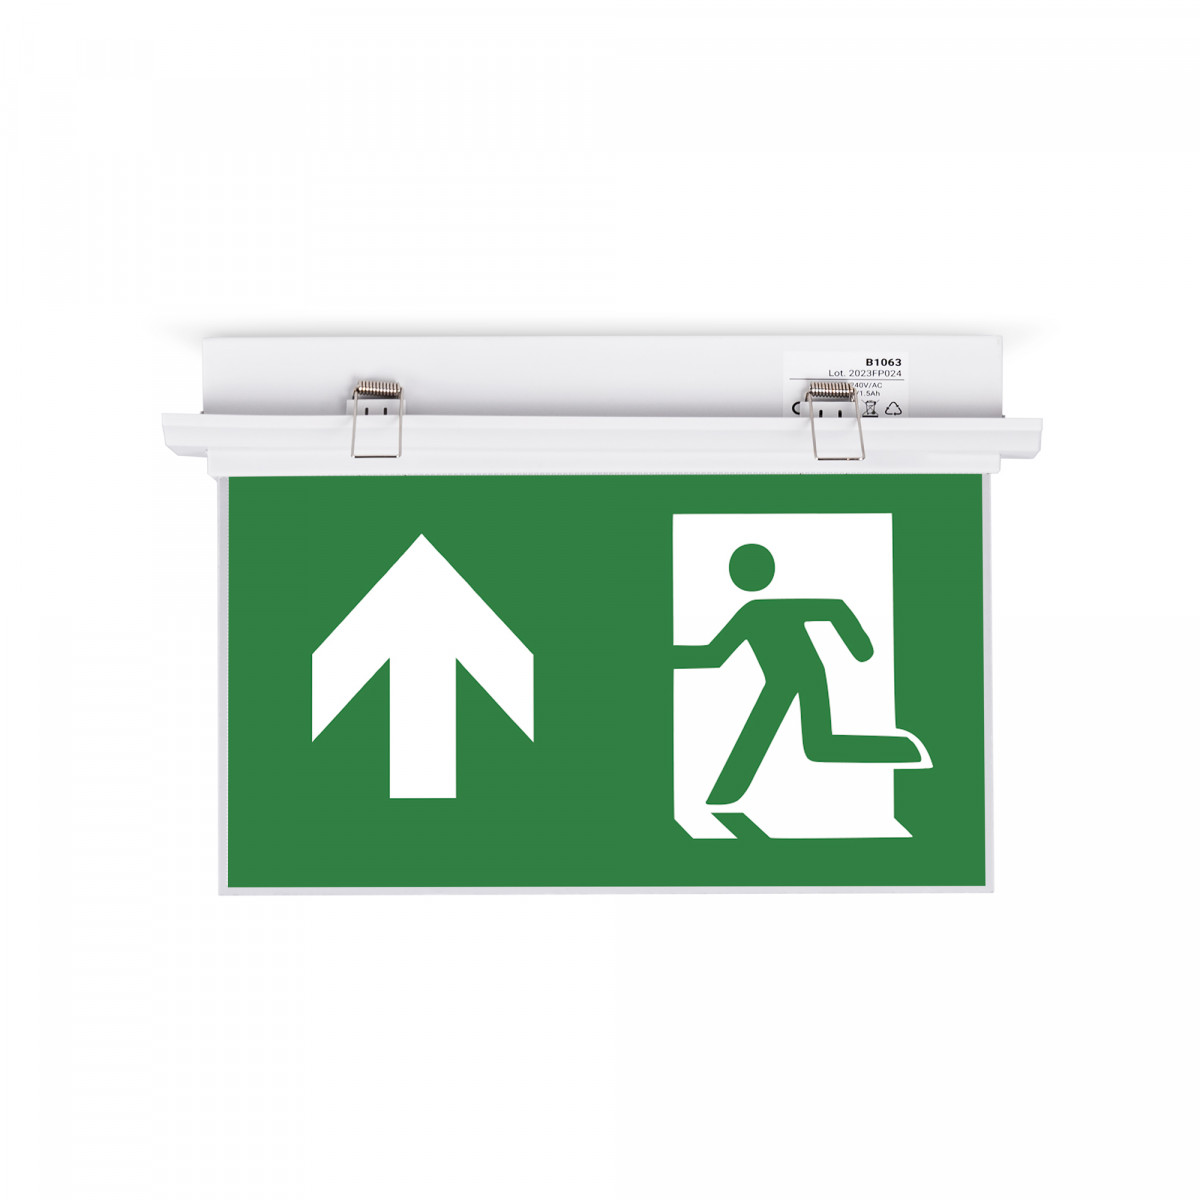 Recessed permanent emergency light with "Up arrow" pictogram